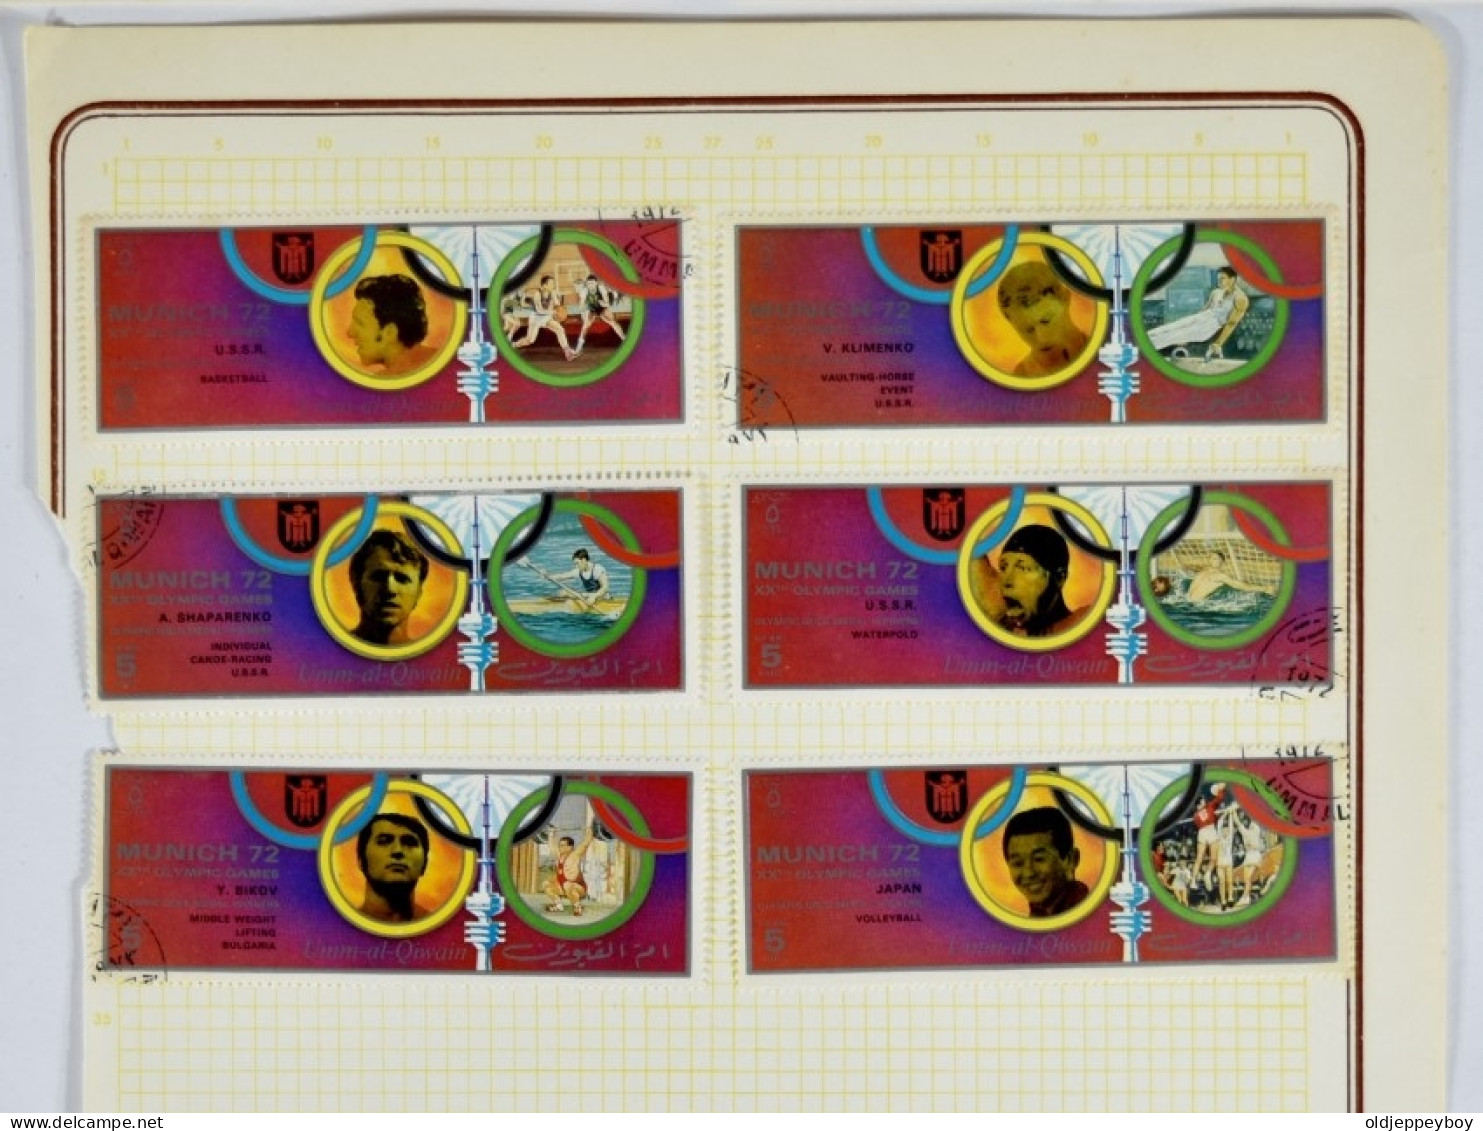 Lot De 30 Timbres/stamps  UMM AL QIWAIN 1972 - JUEGOS OLIMPICOS DE MUNICH 72 -  Complete Set Of 30 Stamps OLYMPIC GAMES - Sommer 1972: München